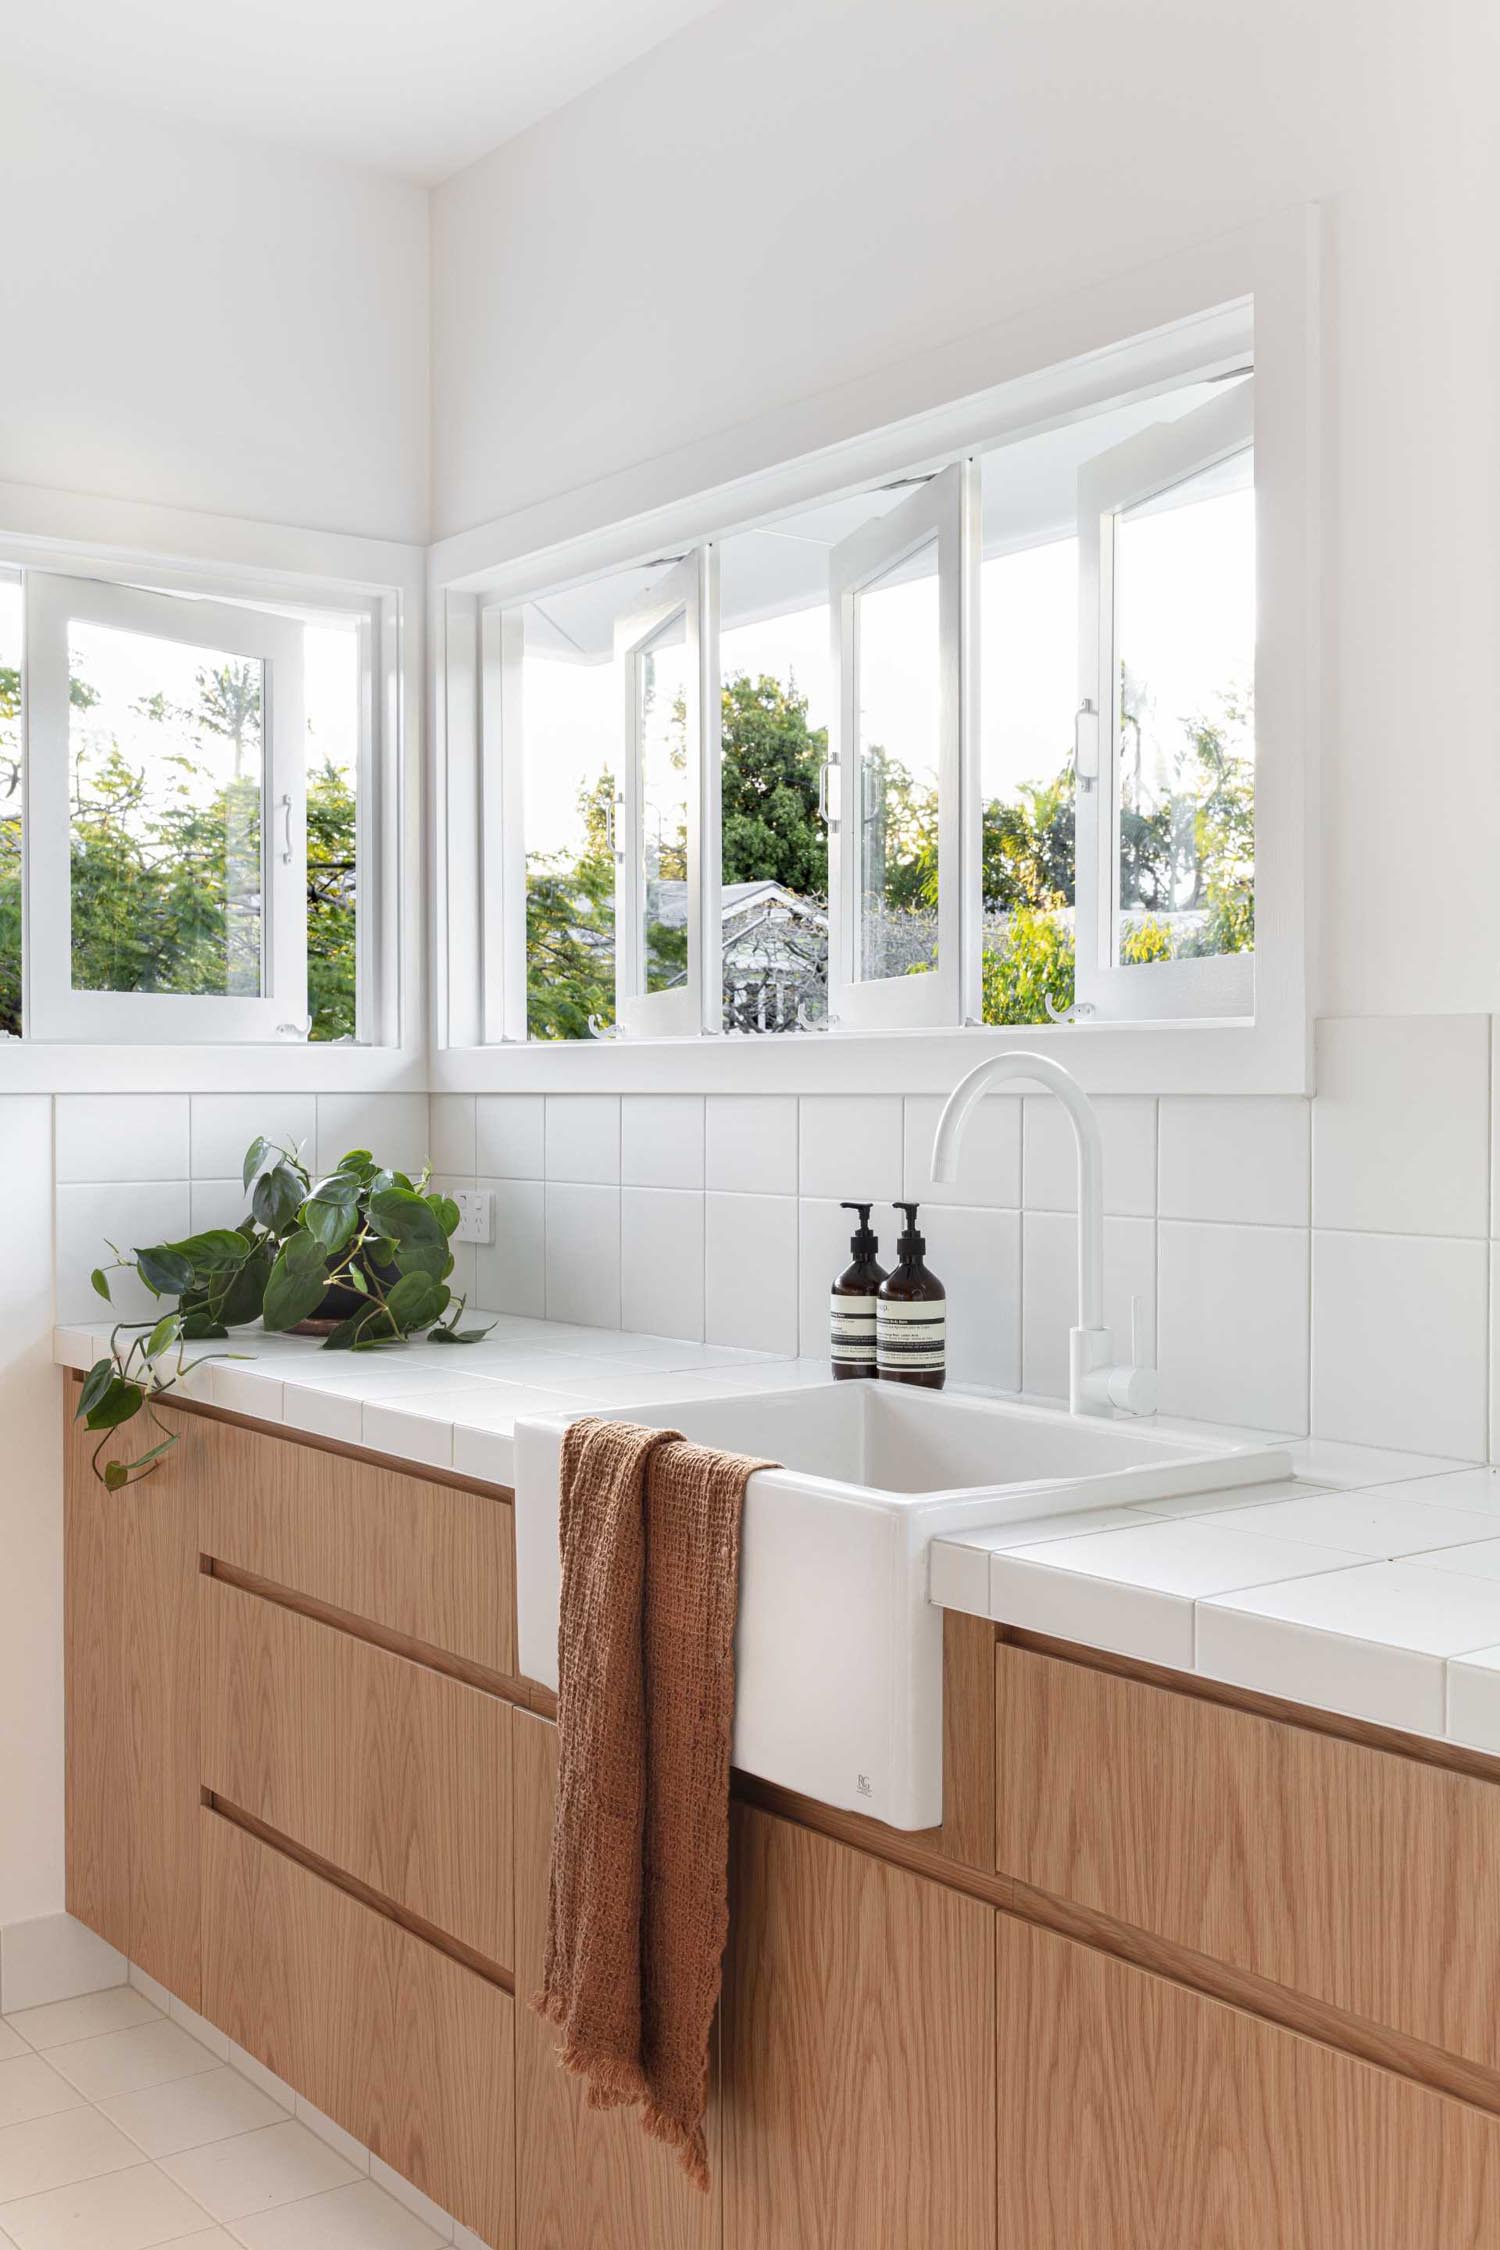 In this laundry room, hardware-free wood cabinets have been combined with a white apron sink, a white tiled countertop, and matching backsplash.